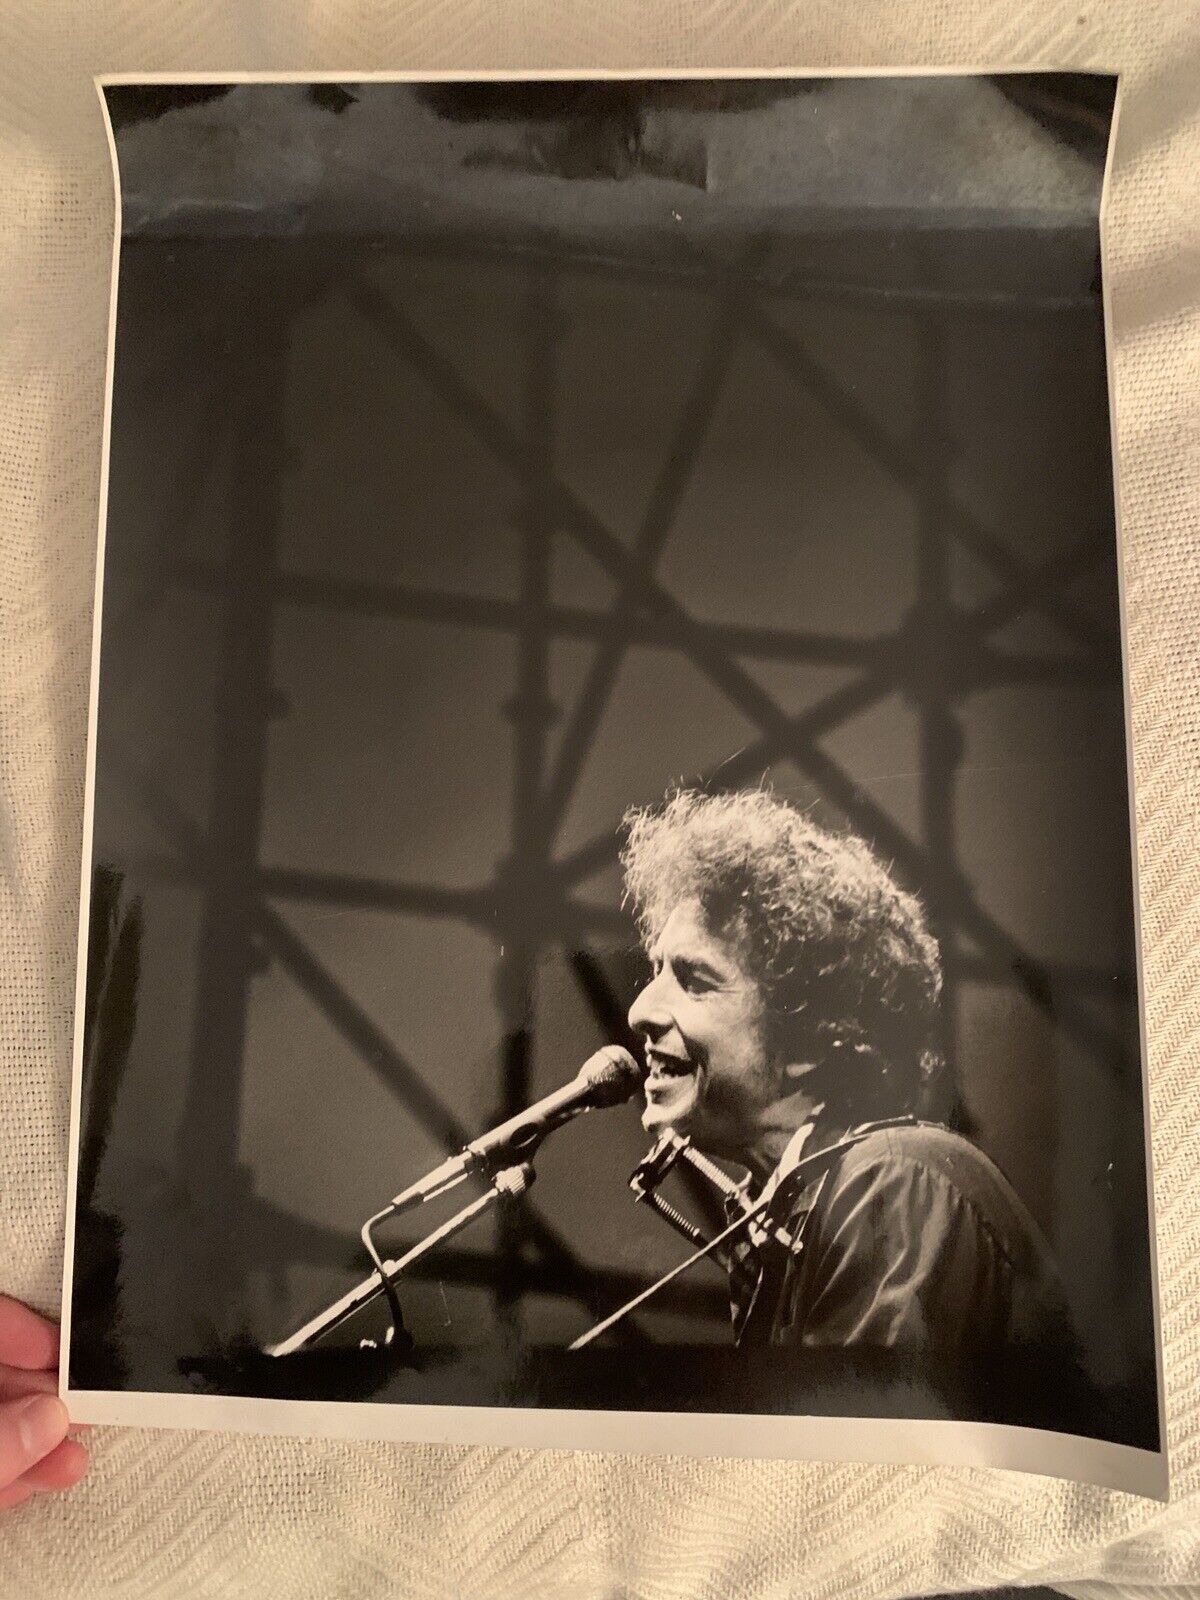 Bob Dylan Type 1 Photograph 5/7/84 By Tony Kenwright 14 1/2” By 11”